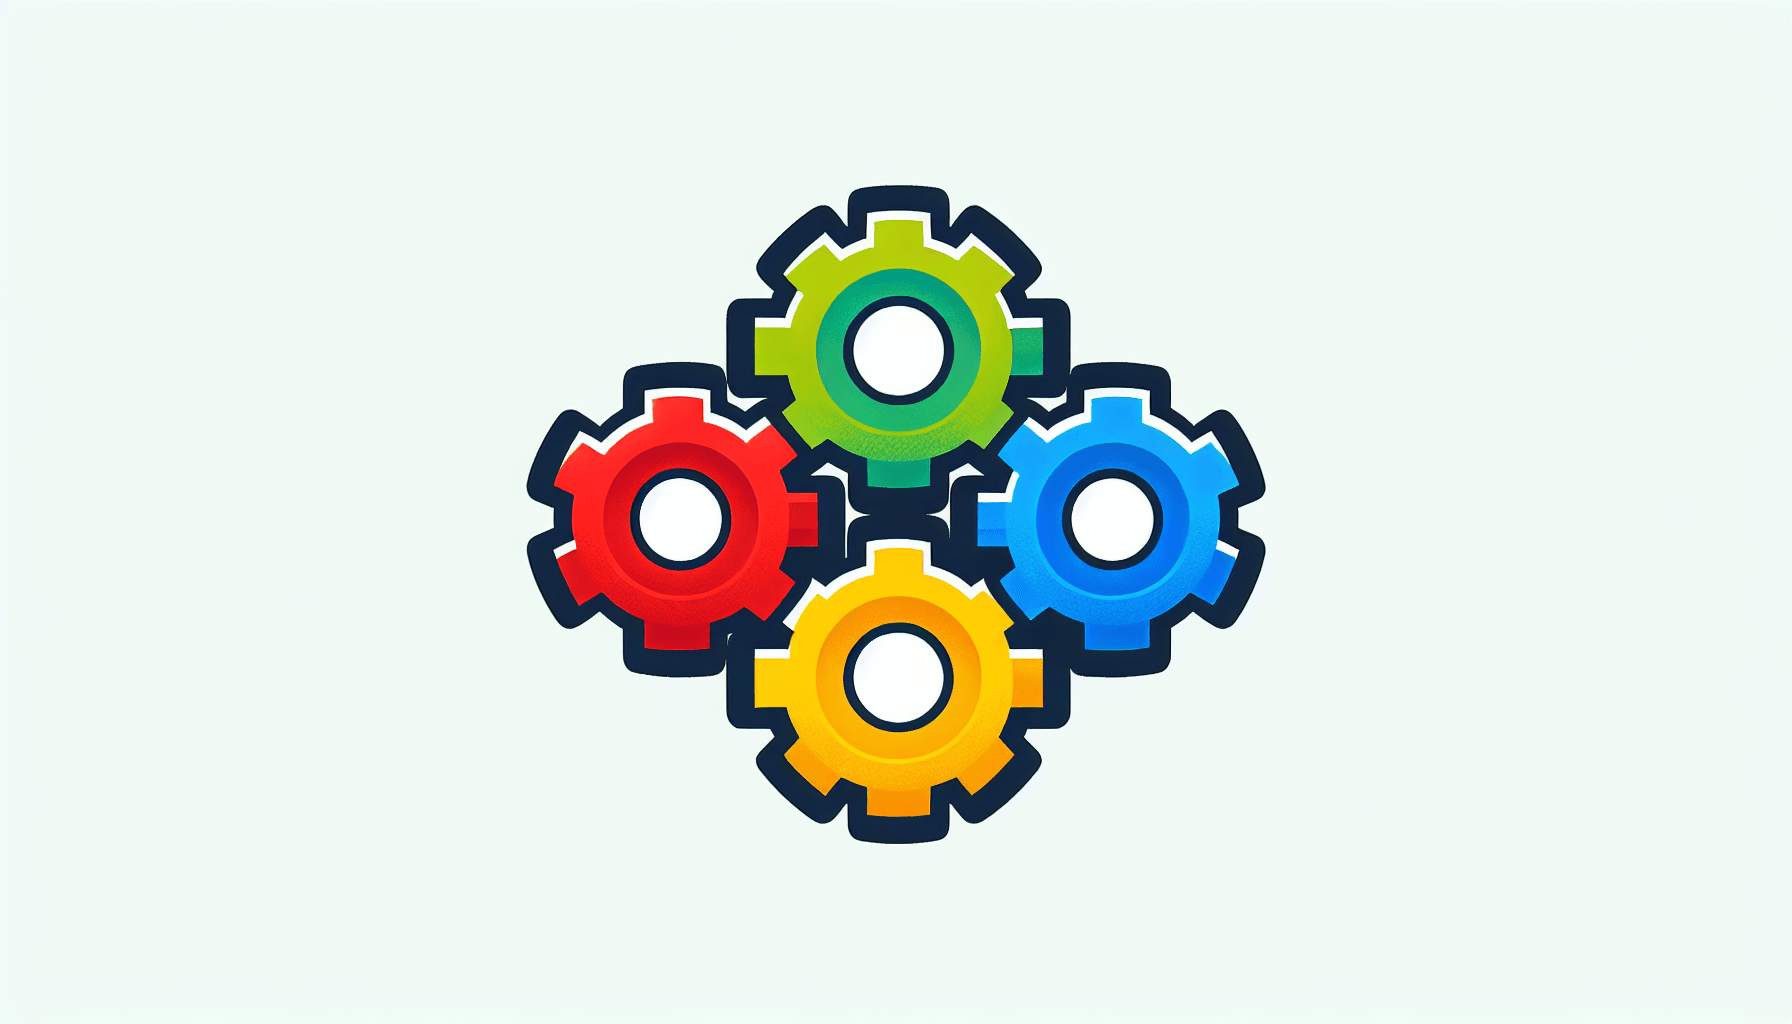 Gear in flat illustration style and white background, red #f47574, green #88c7a8, yellow #fcc44b, and blue #645bc8 colors.